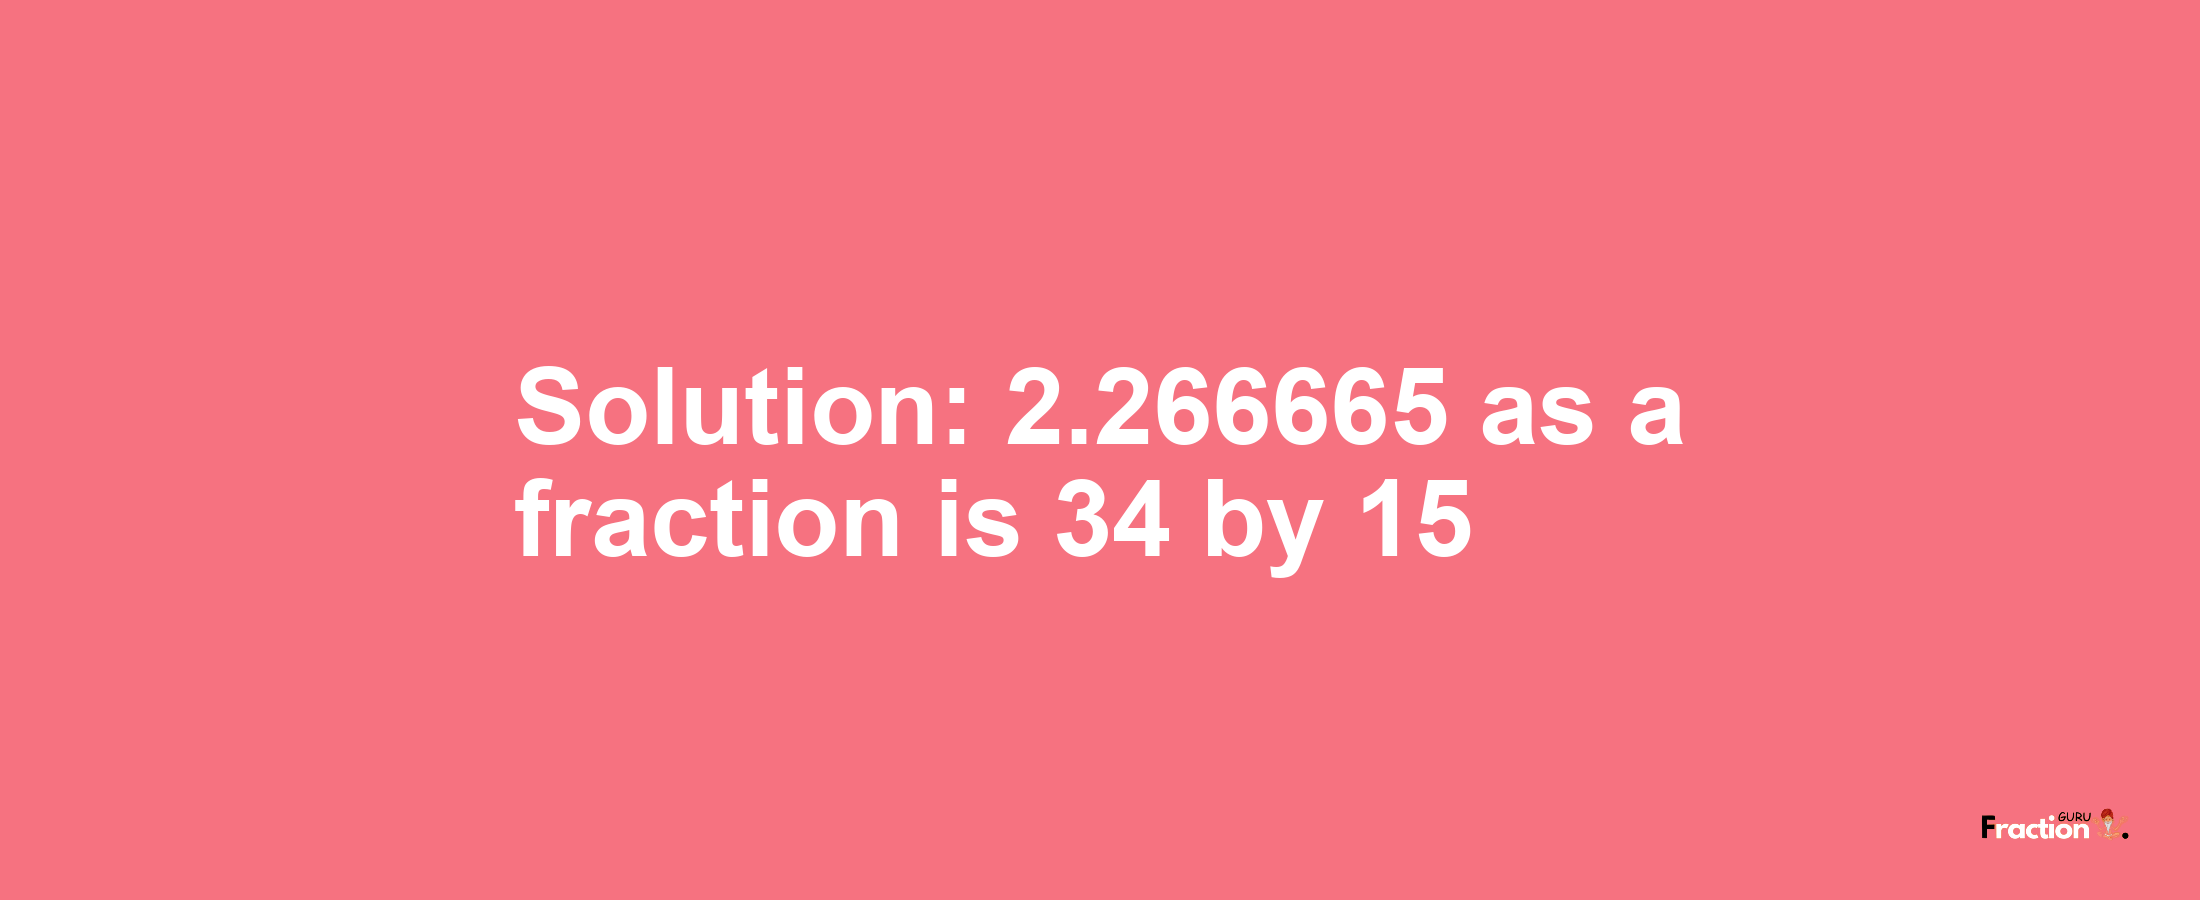 Solution:2.266665 as a fraction is 34/15